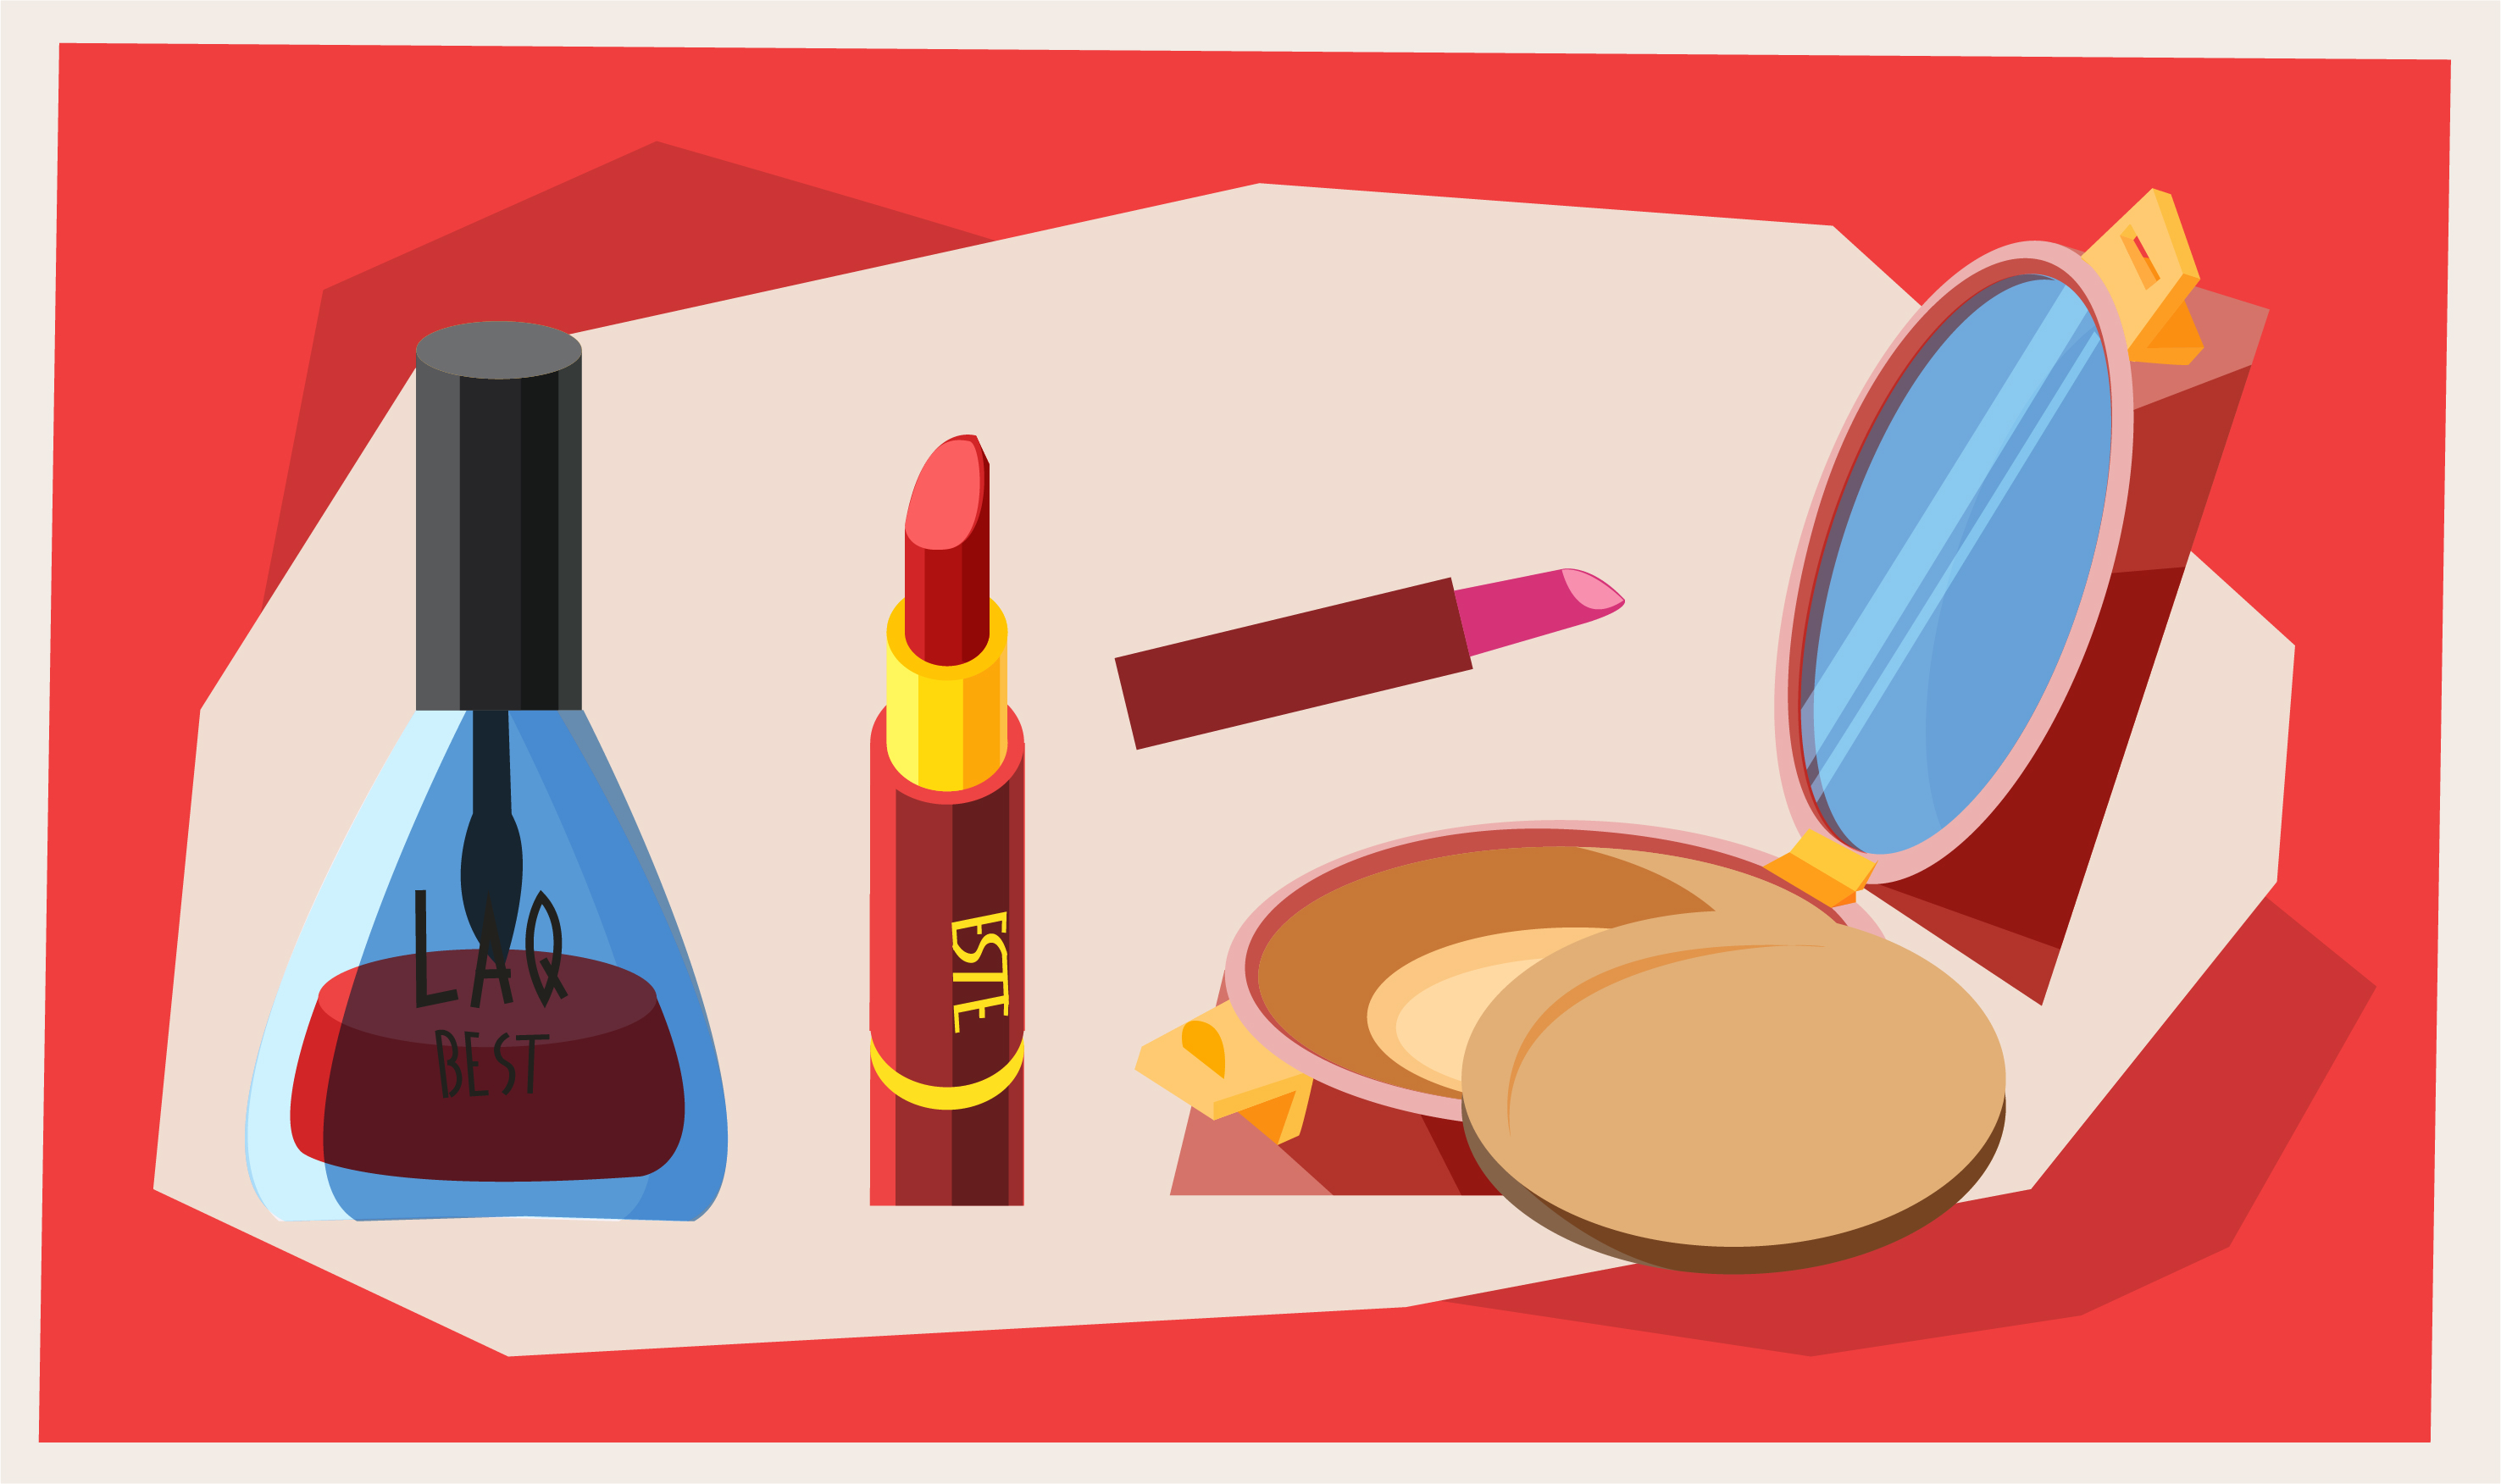 Beauty fashion objects vector illustration for design Photoshop brush